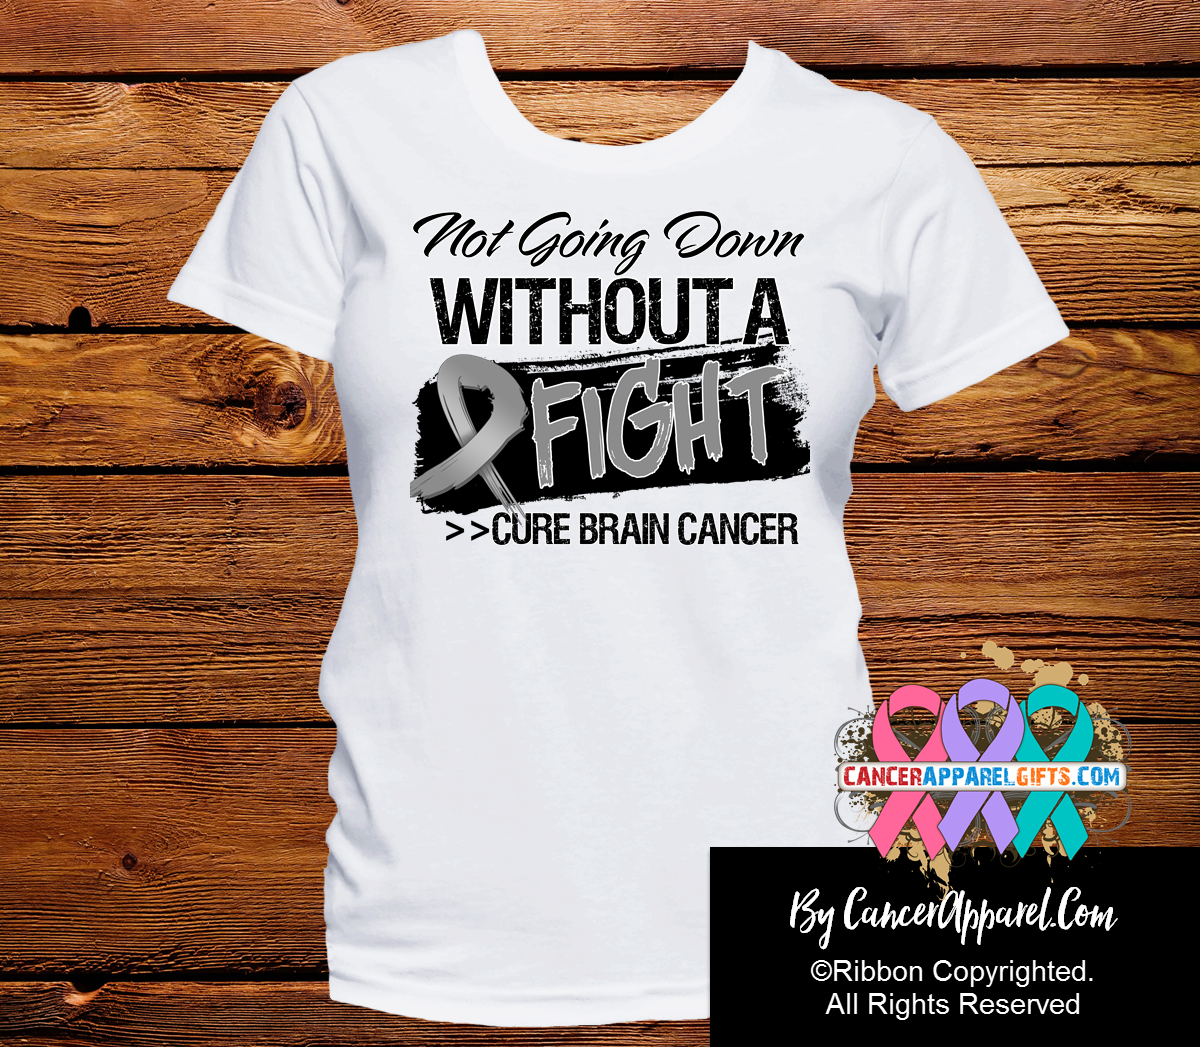 Brain Cancer Not Going Down Without a Fight Shirts - Cancer Apparel and Gifts